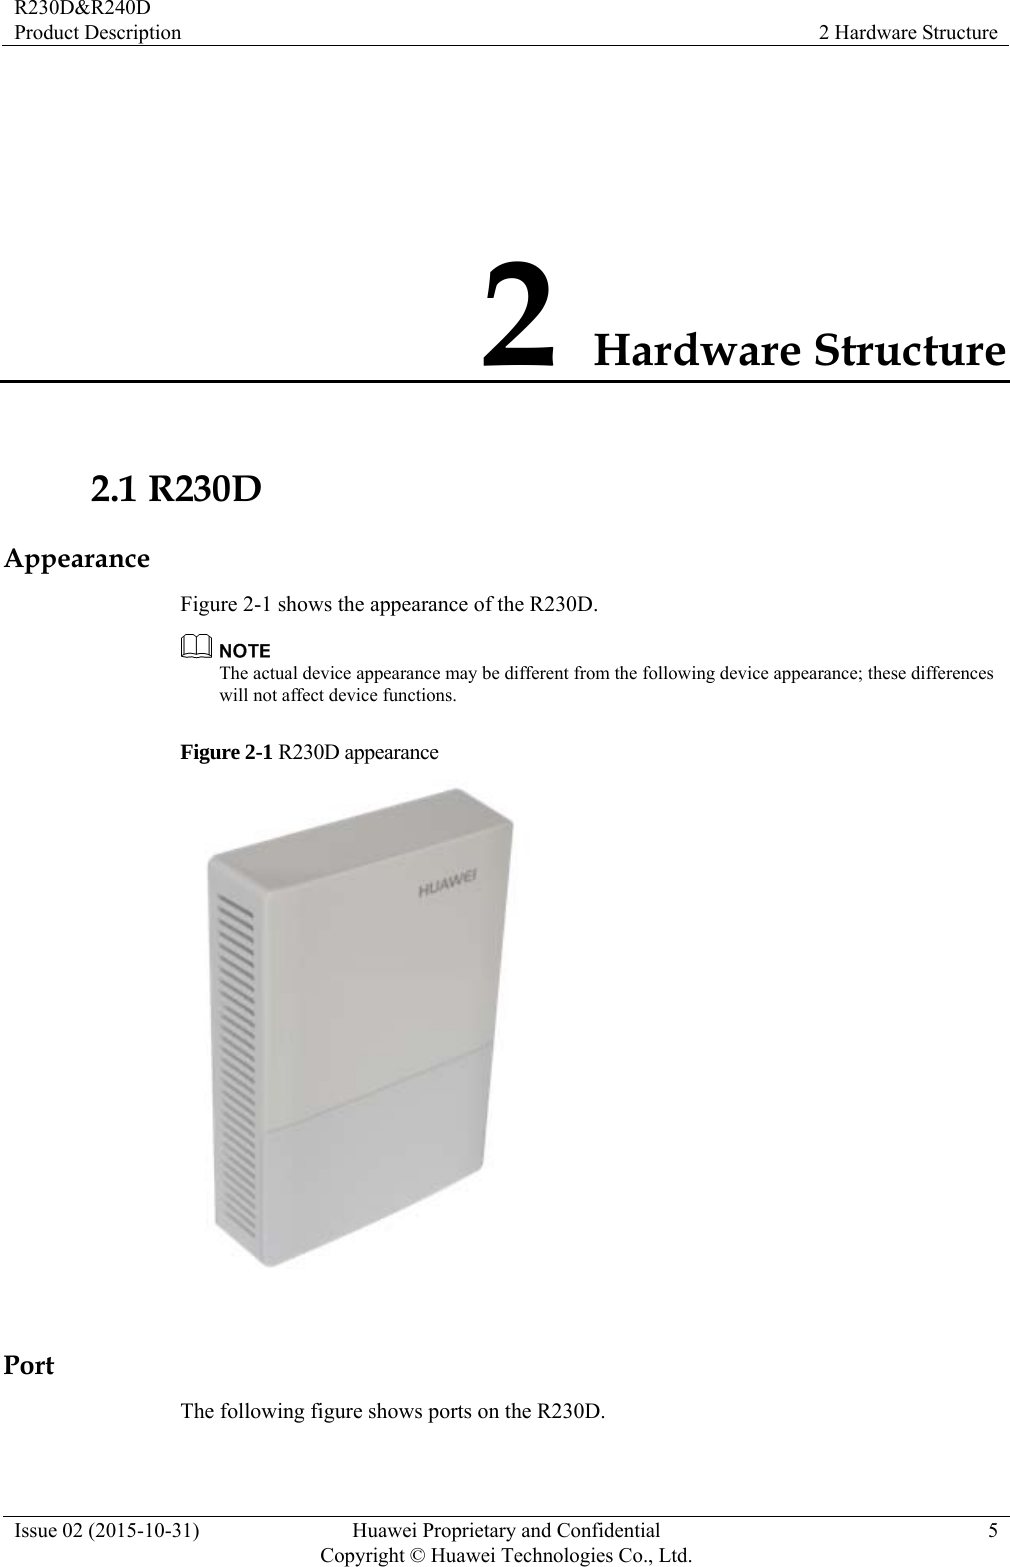 R230D&amp;R240D Product Description  2 Hardware Structure Issue 02 (2015-10-31)  Huawei Proprietary and Confidential         Copyright © Huawei Technologies Co., Ltd.5 2 Hardware Structure 2.1 R230D Appearance Figure 2-1 shows the appearance of the R230D.  The actual device appearance may be different from the following device appearance; these differences will not affect device functions. Figure 2-1 R230D appearance   Port The following figure shows ports on the R230D. 